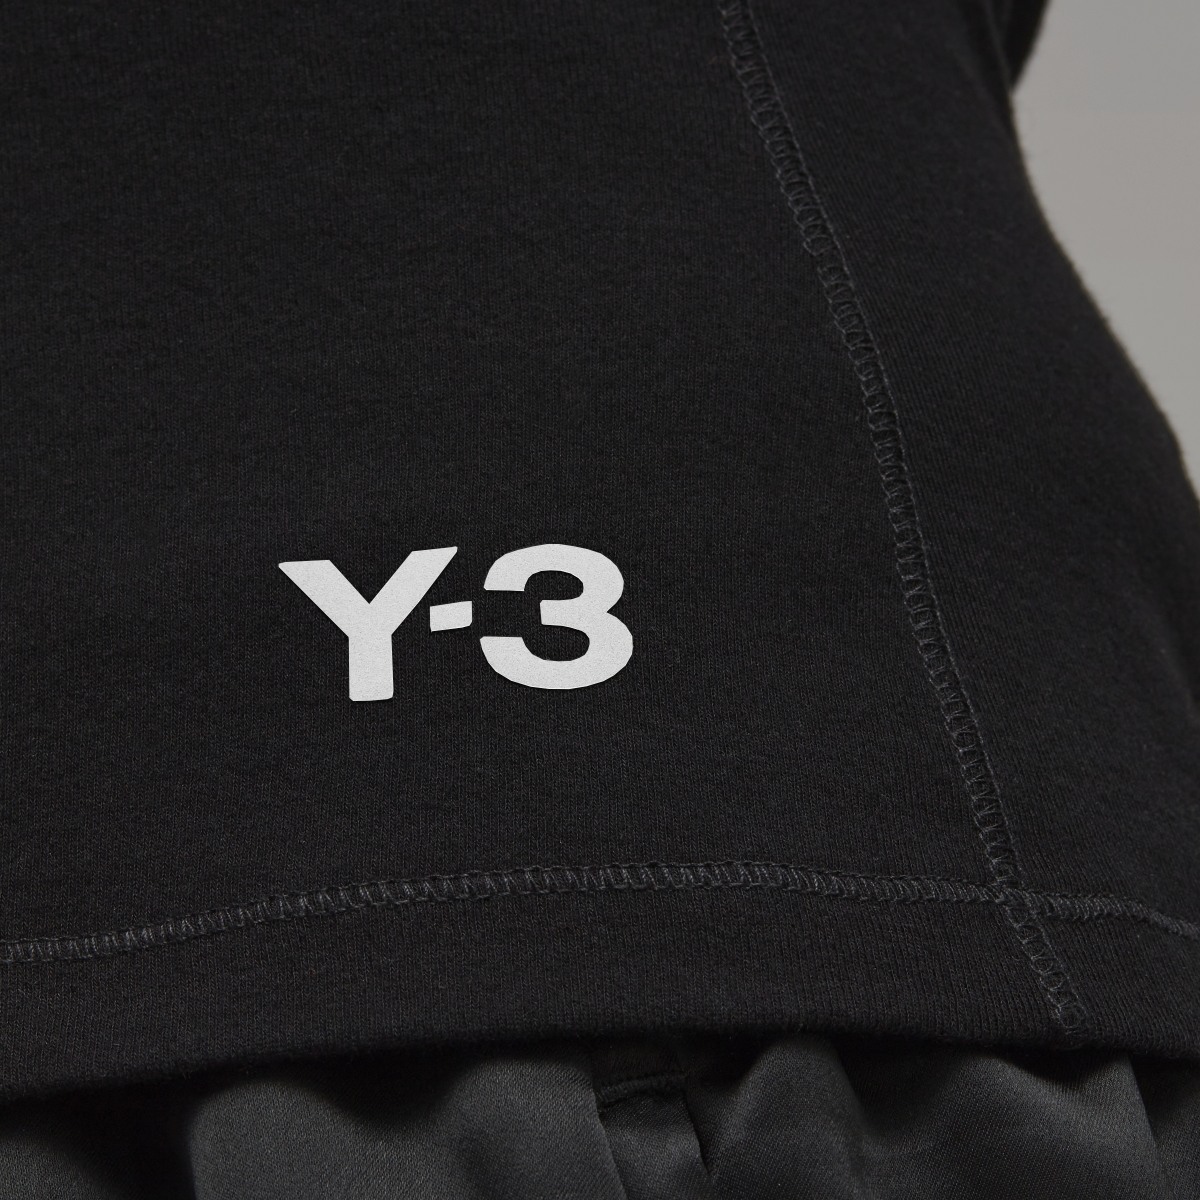 Adidas Y-3 Fitted Long Sleeve Long-Sleeve Top. 6